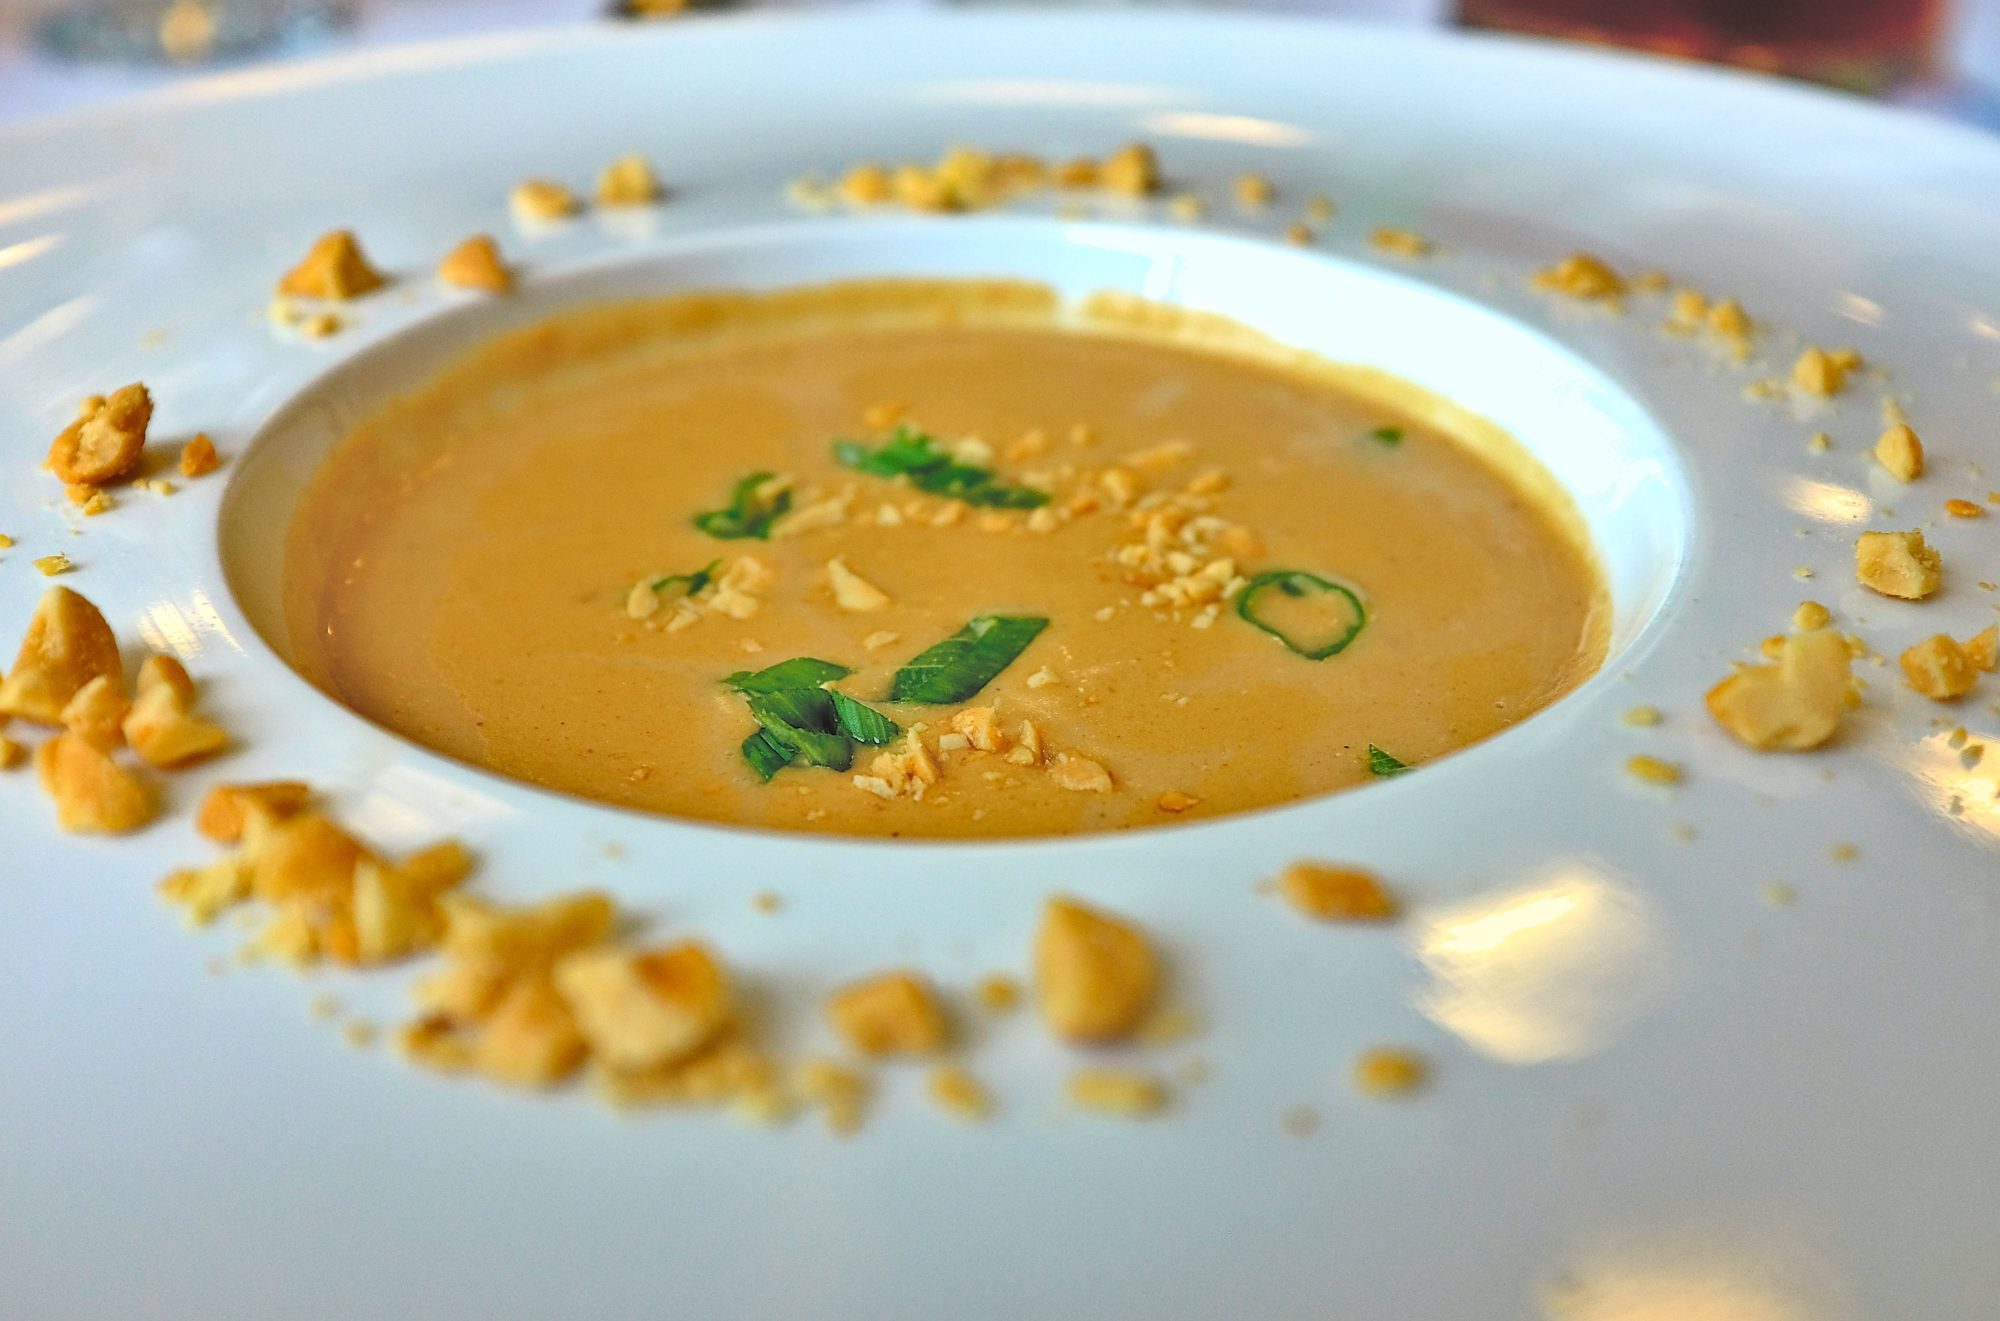 A bowl of peanut soup from Greenway Restaurant at CPCC